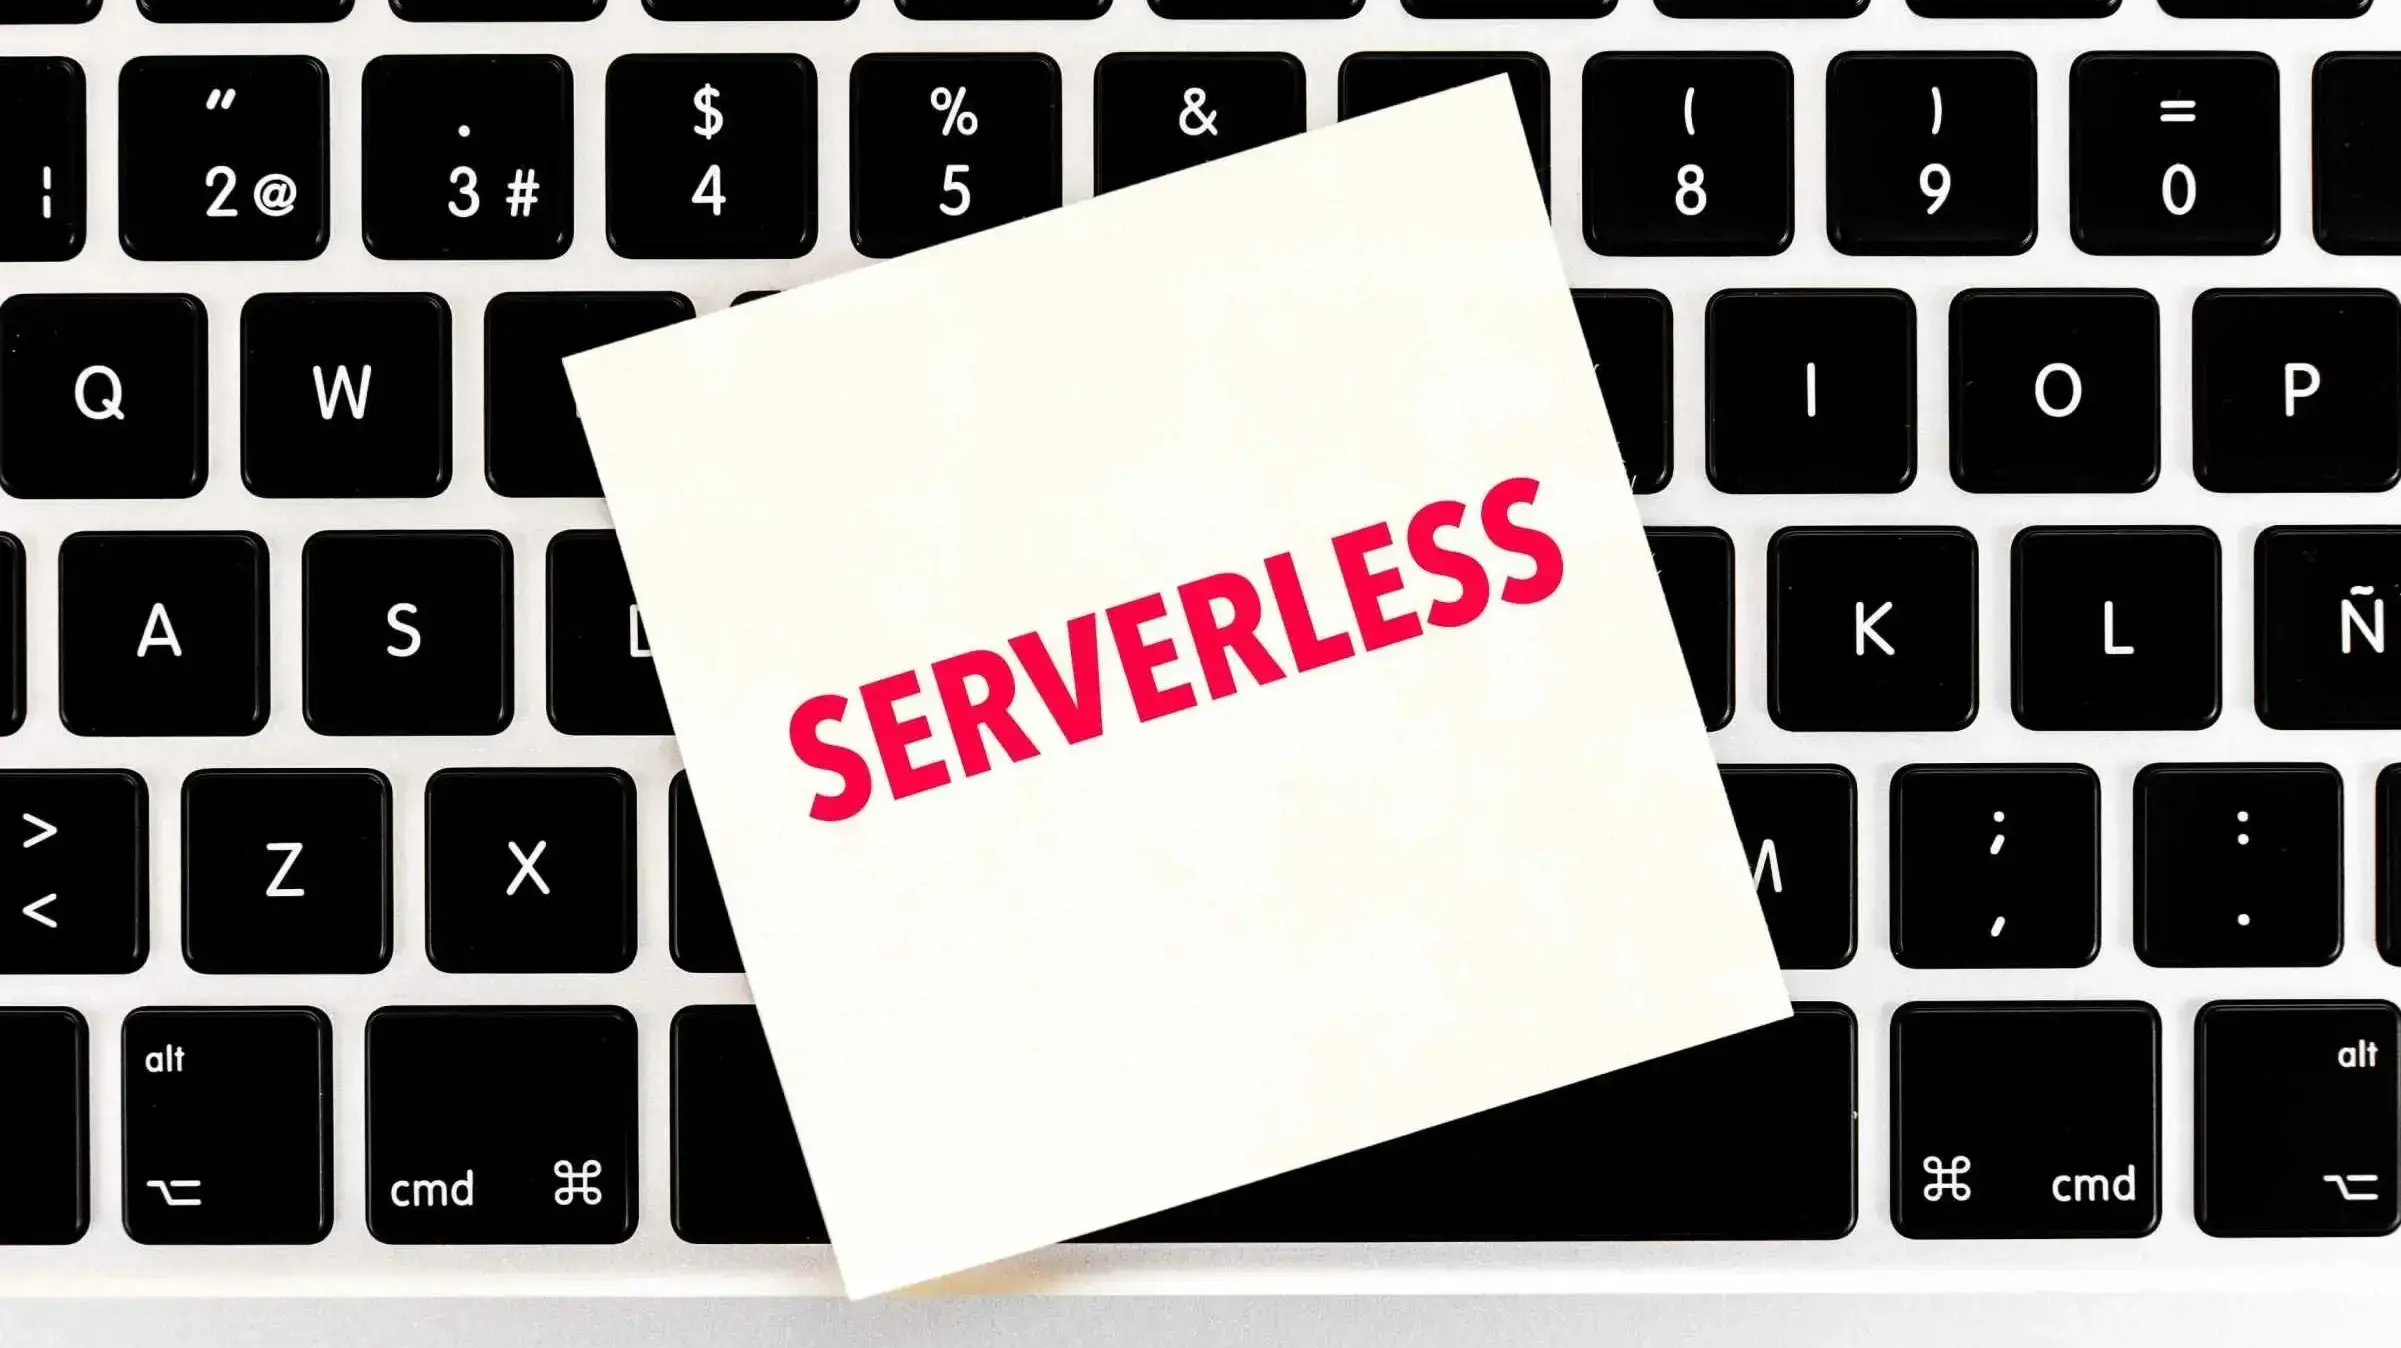 What is Serverless Architecture?